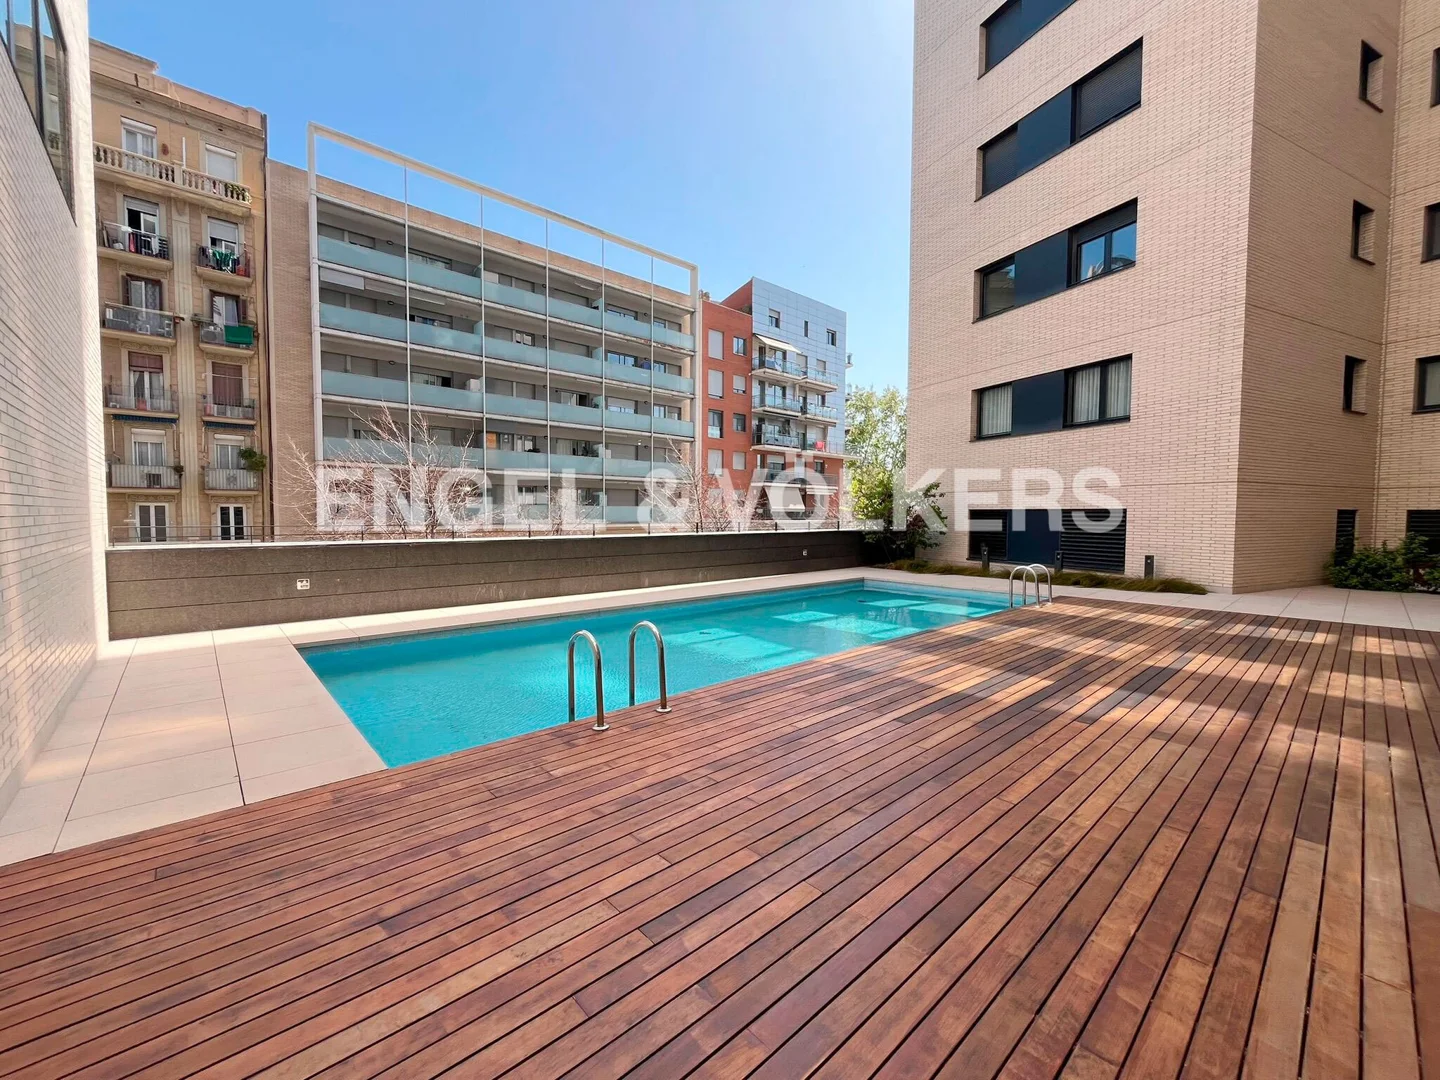 Premium flat with swimming pool and close to the beach.